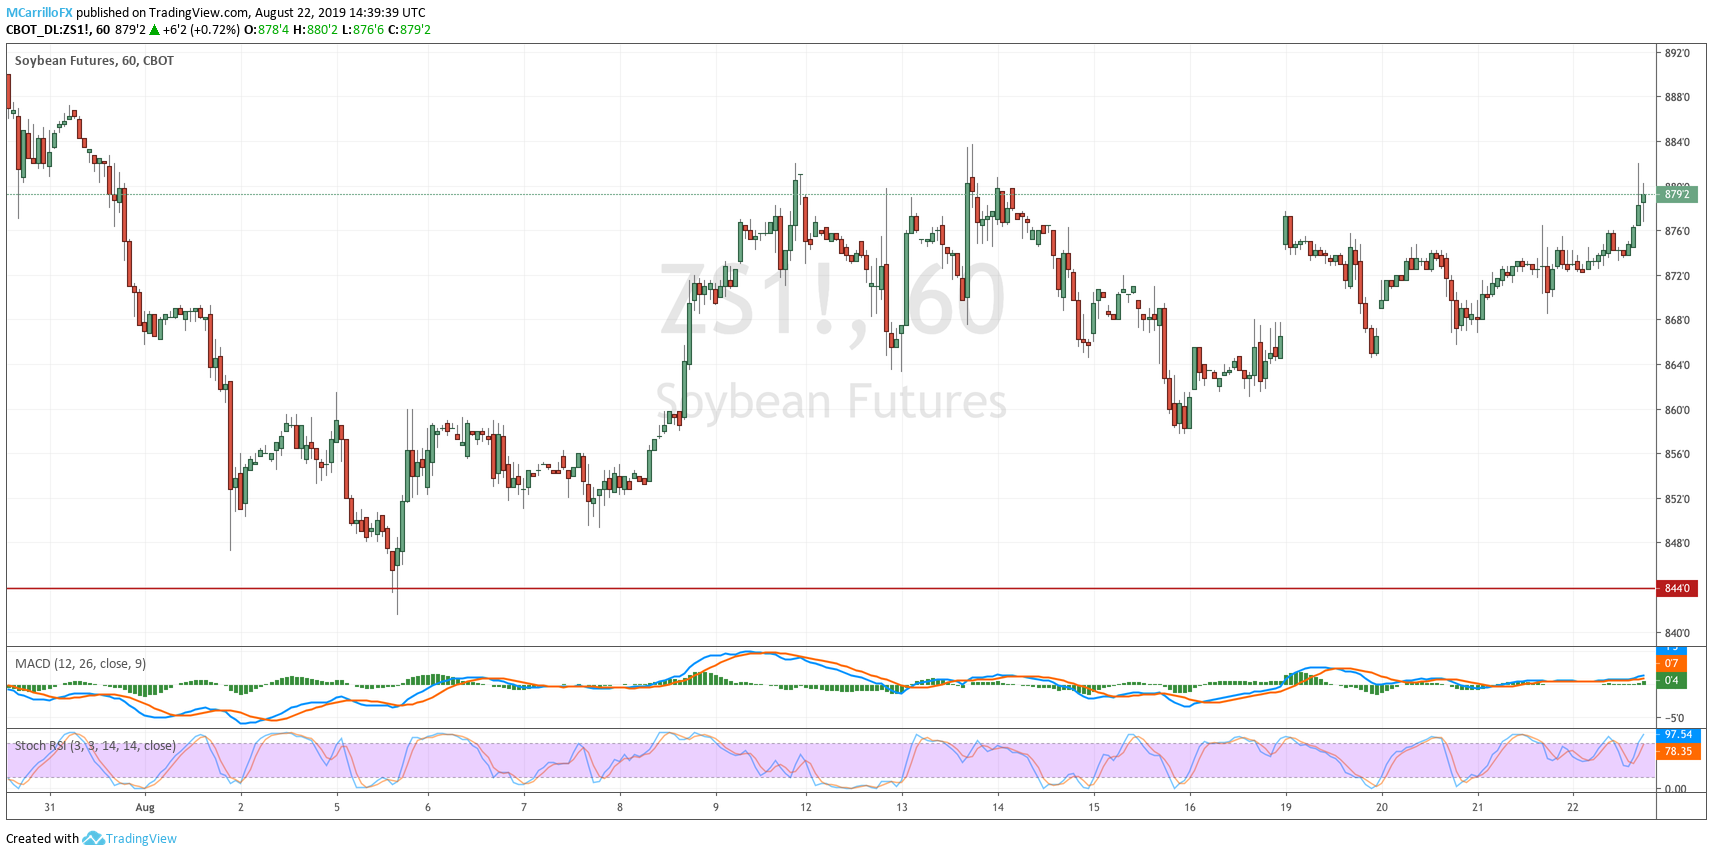 ZS1 Soybean Futures 1-hour chart August 22